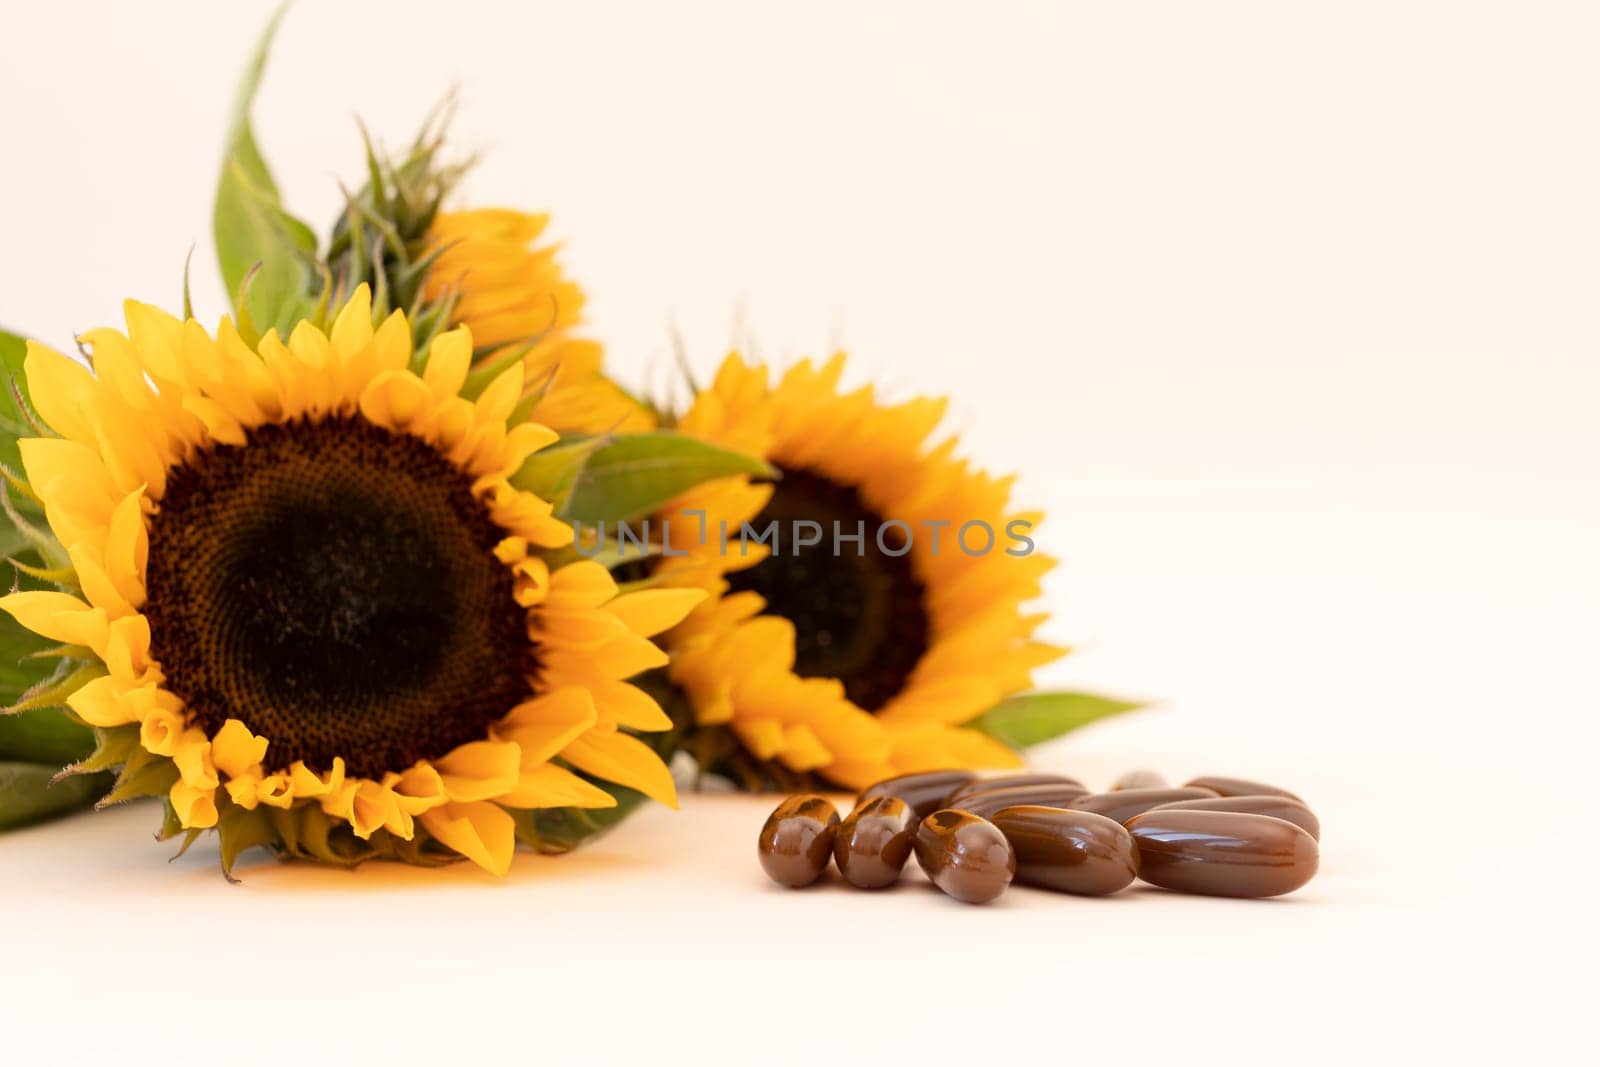 Lecithin Supplement, Brown Softgel Pills, Vitamins on Beige Background with Sunflower Plant. Copy Space For Text. Dietary Capsule or Herbal Supplement, Healthy Lifestyle. Horizontal Plane by netatsi